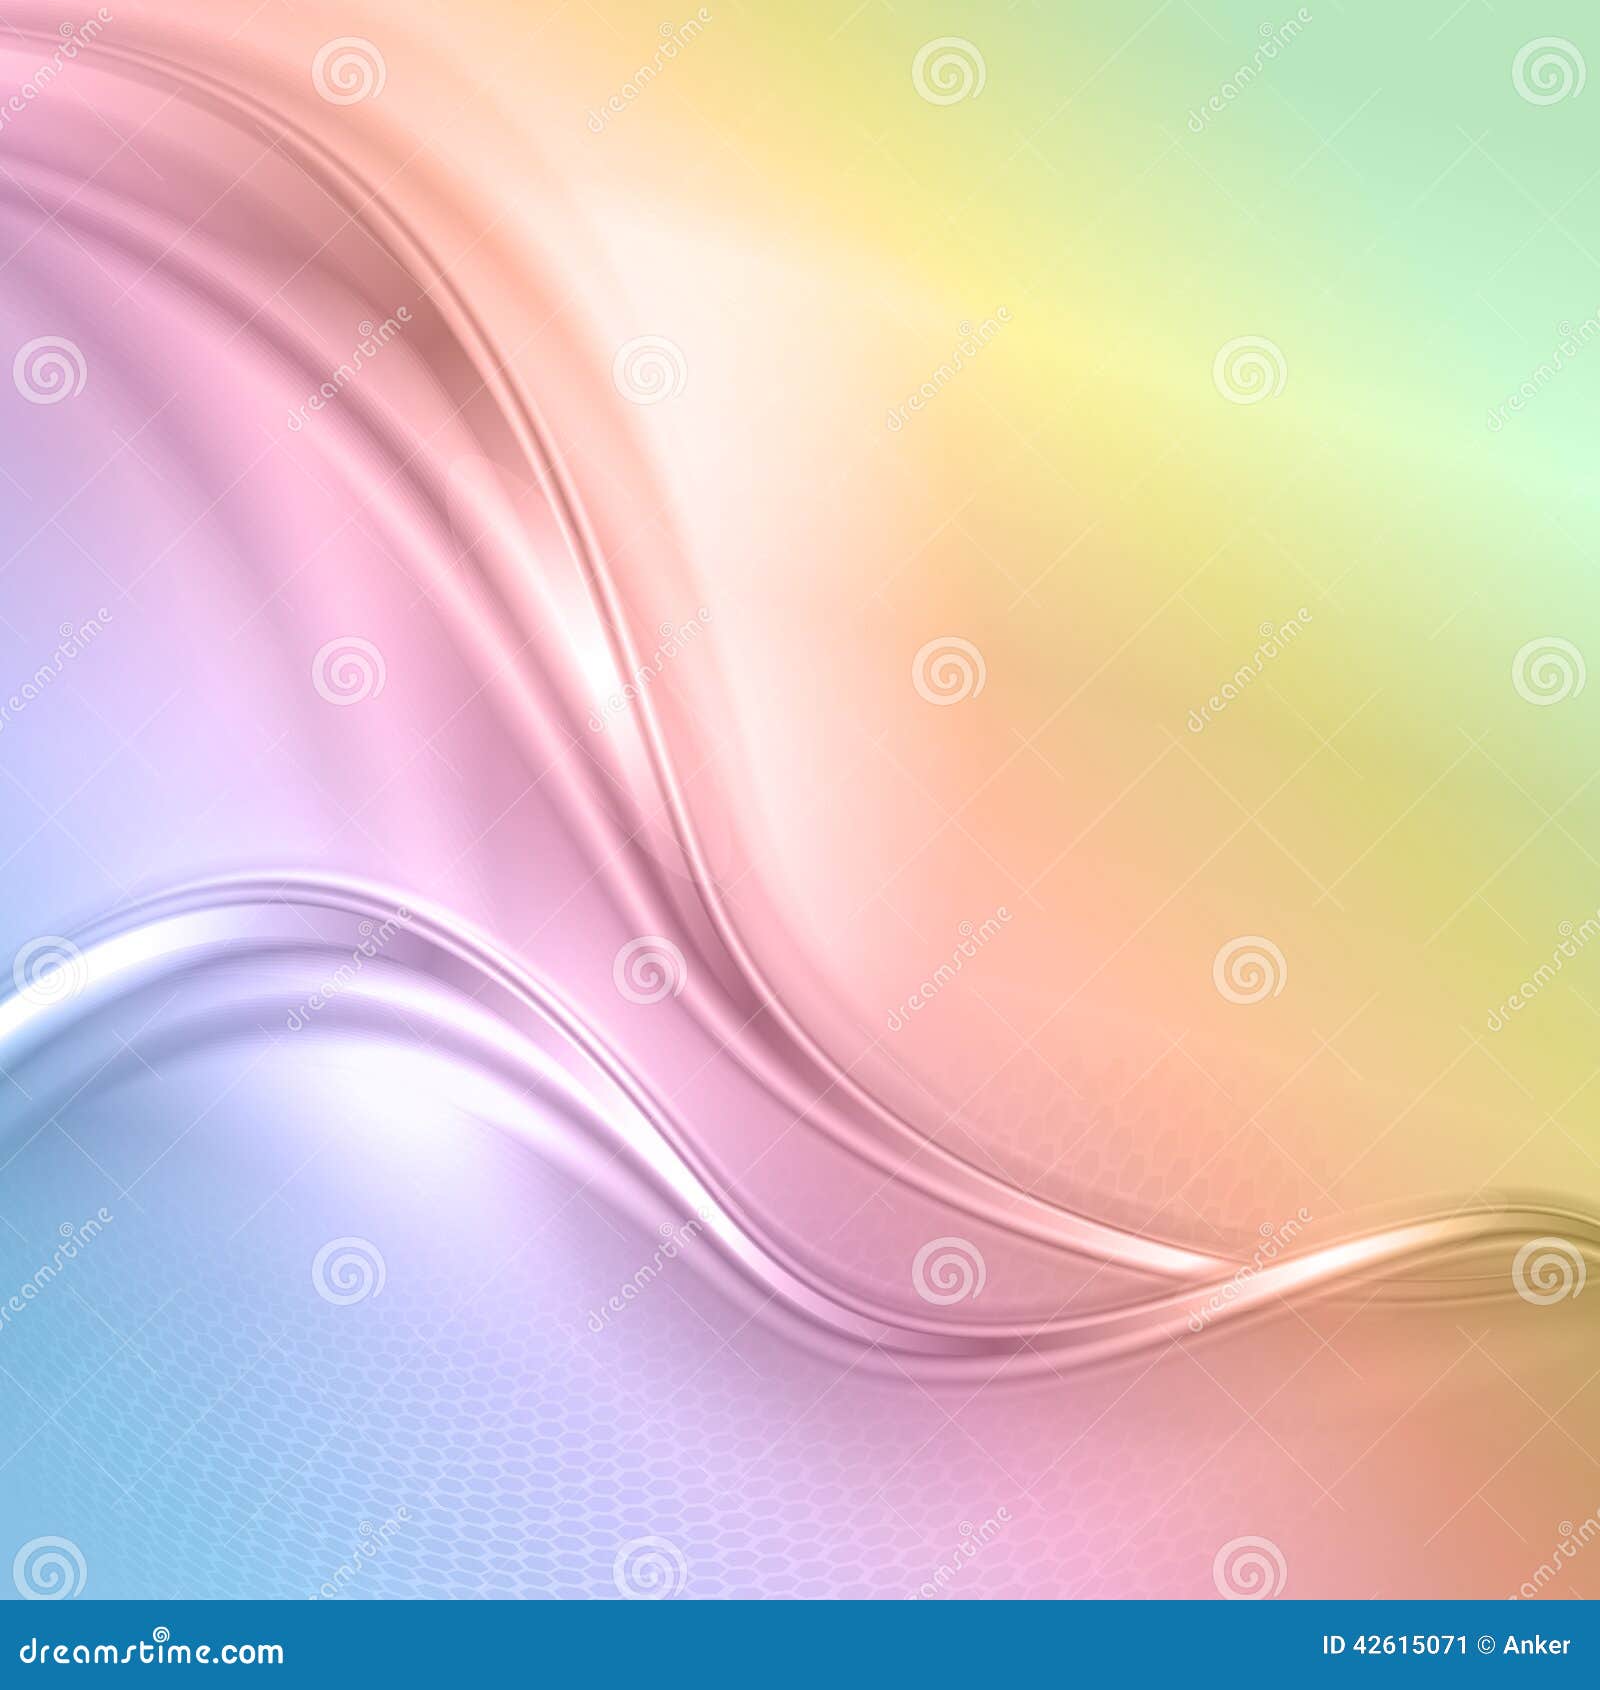 colorful wave wallpaper